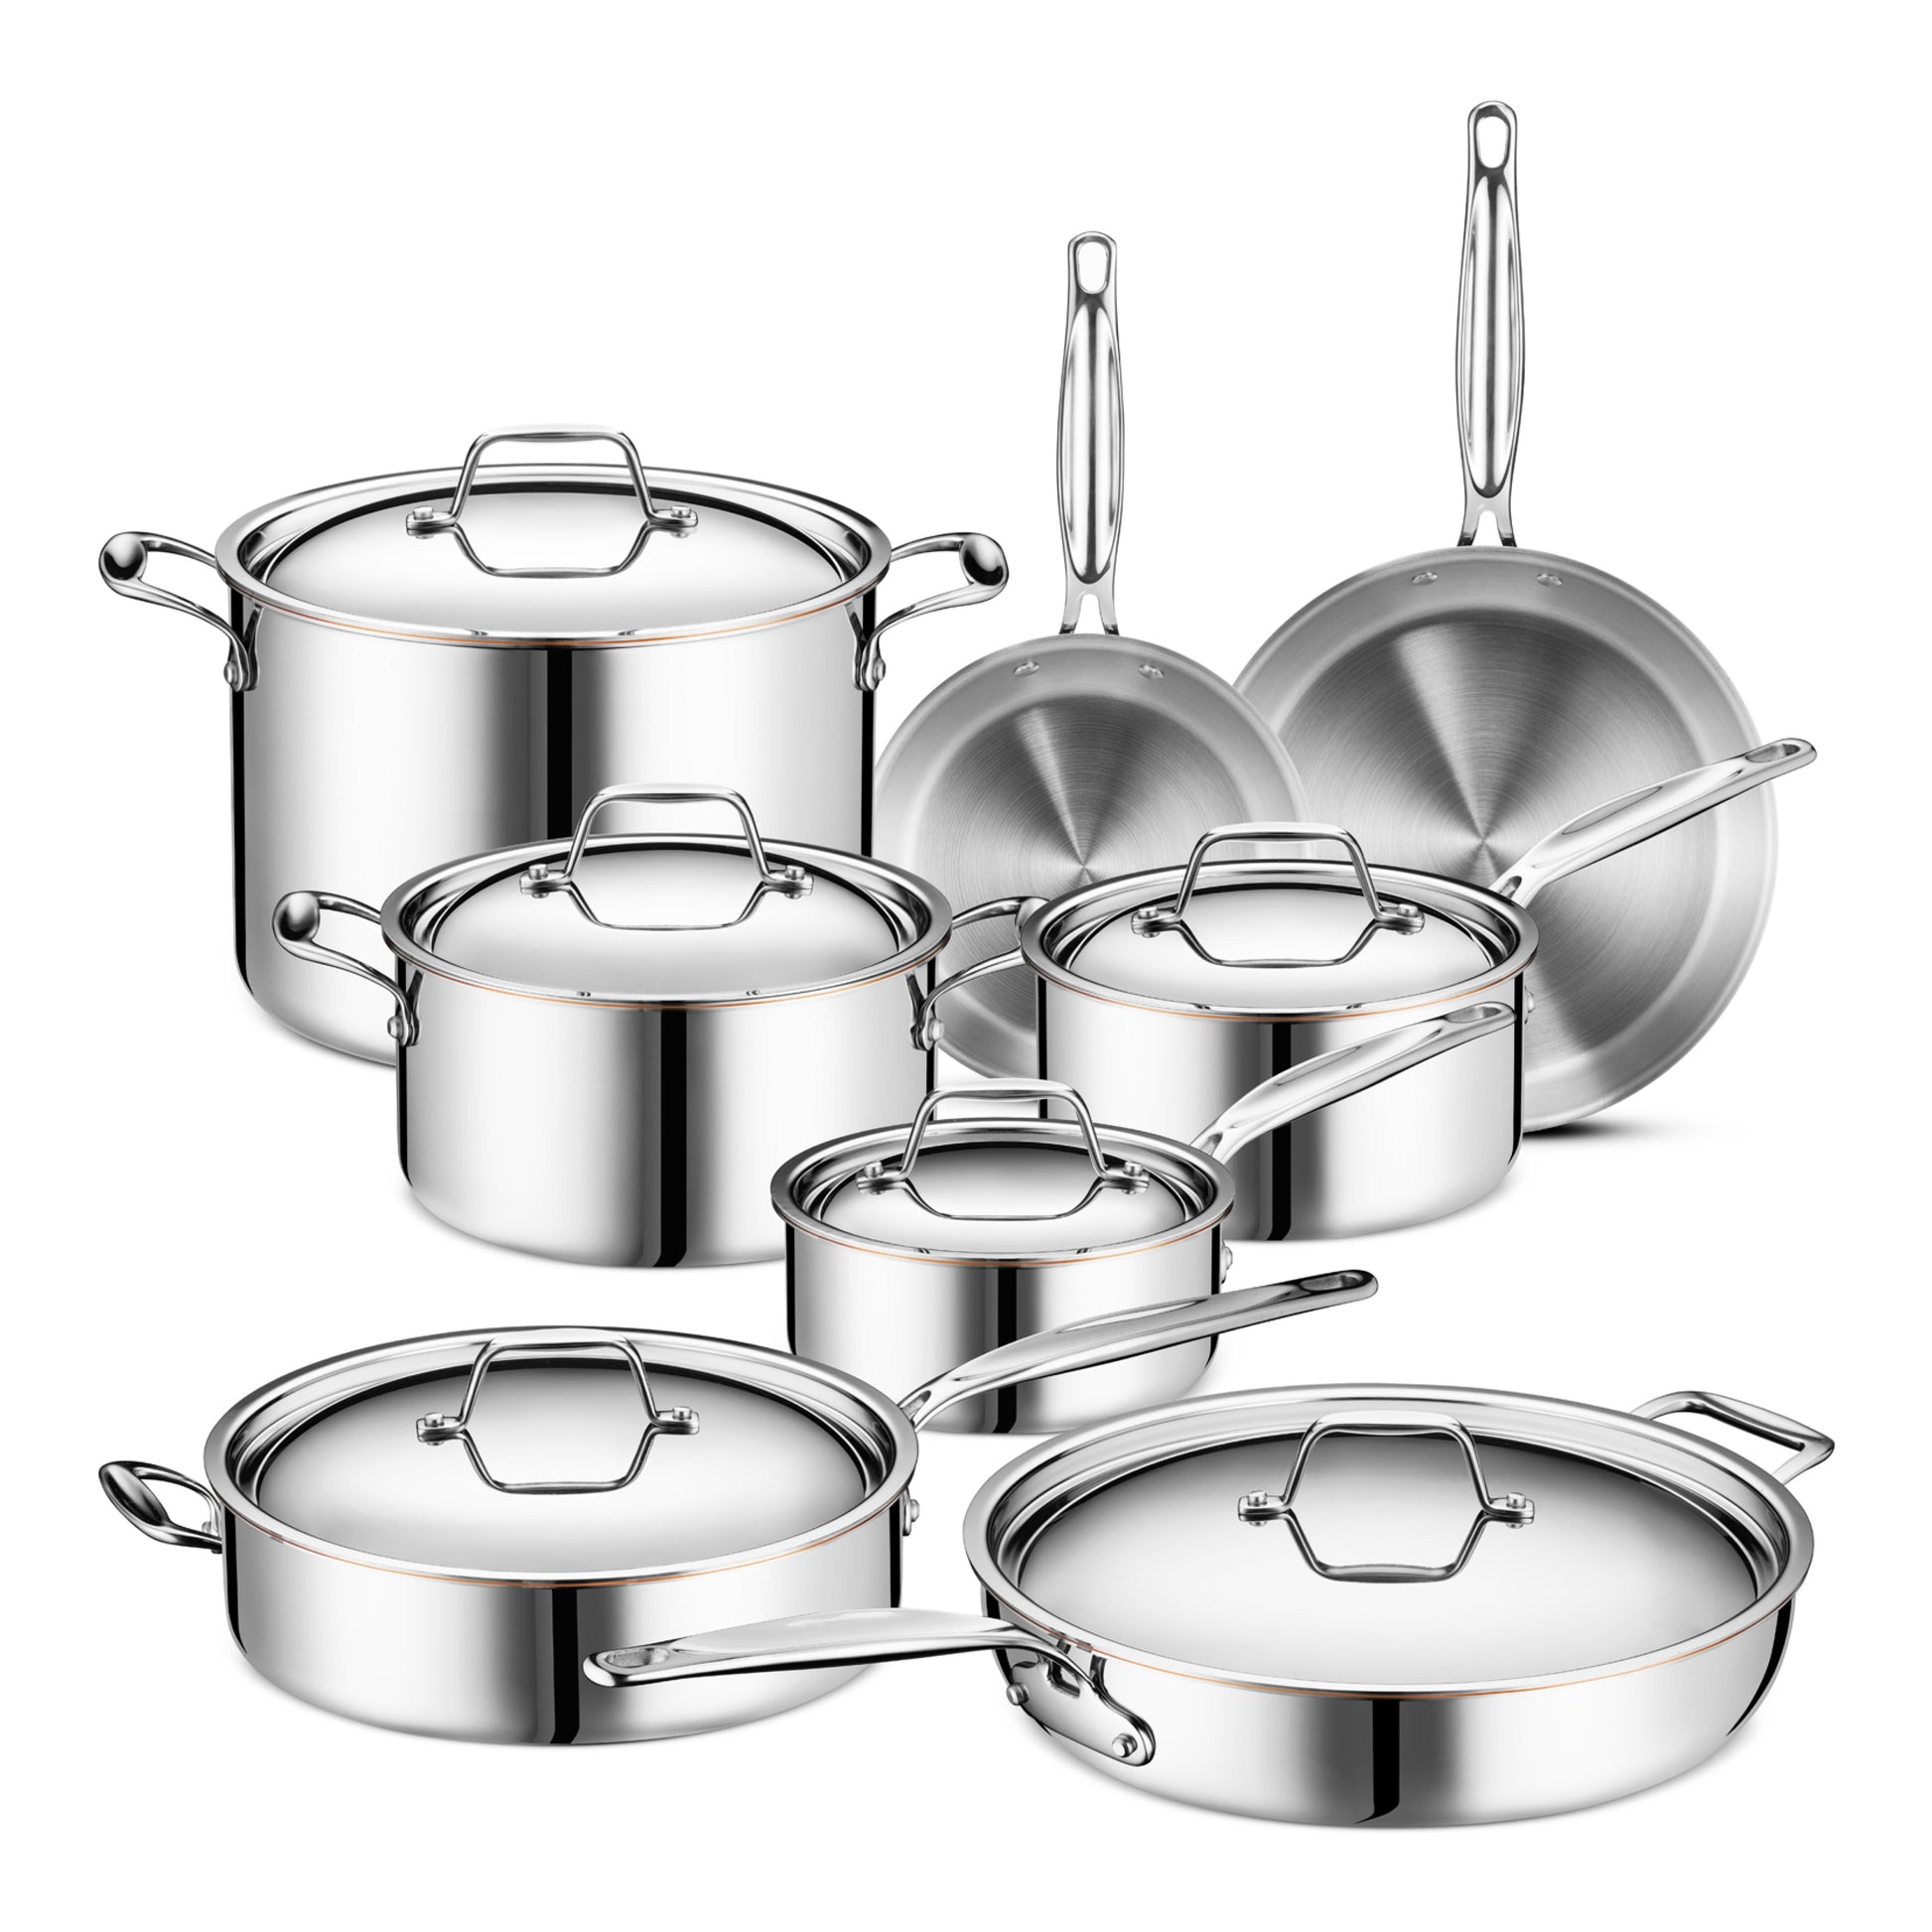 Legend 14 Piece Stainless Steel 5-Ply MultiPly Cookware Set Used